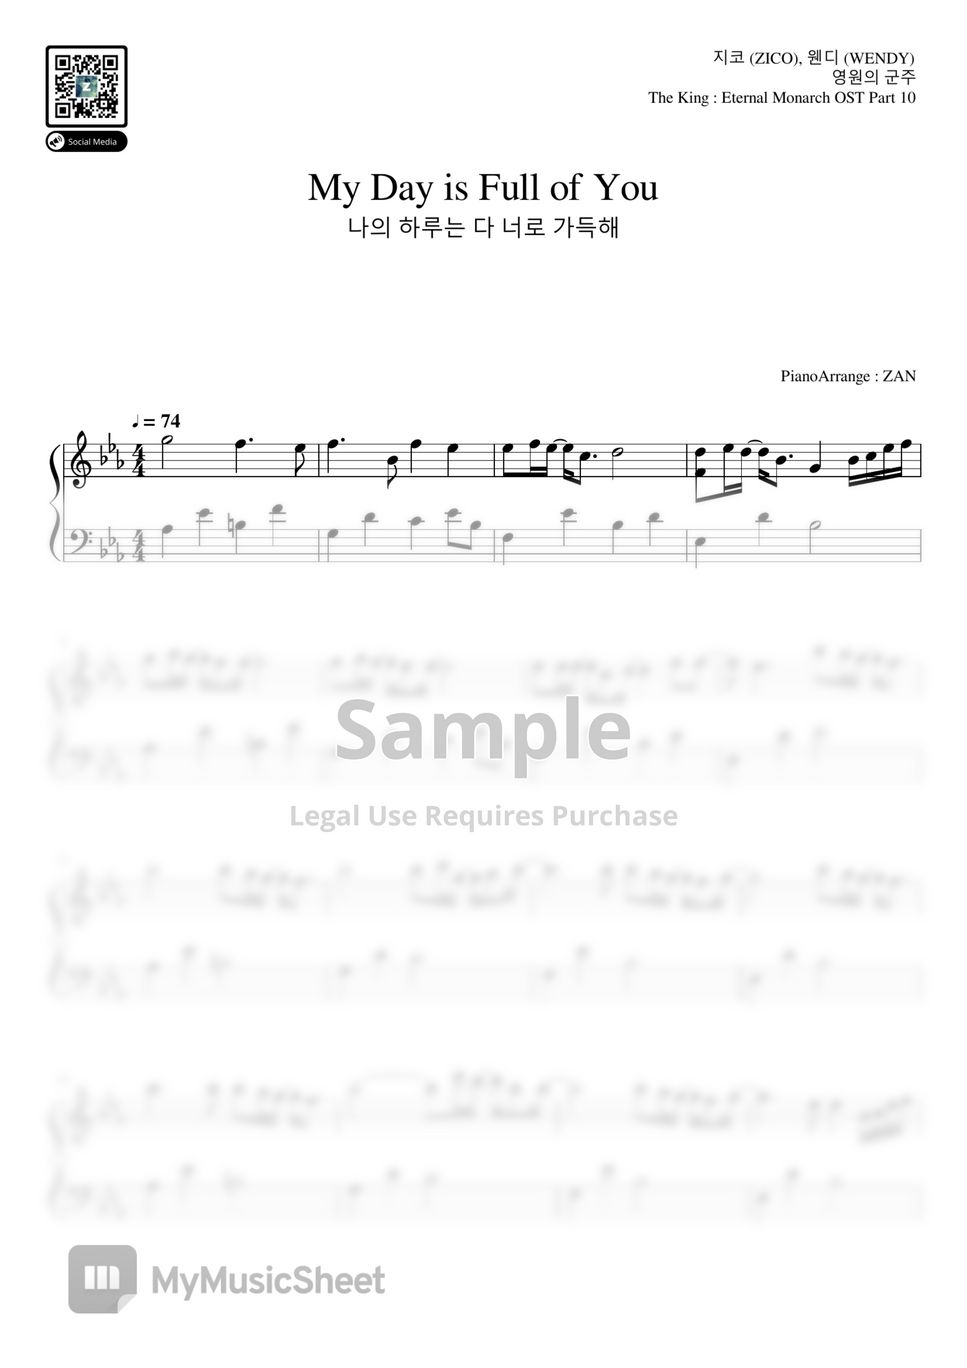 ZICO, WENDY - My Day is Full of you |영원의 군주 The King : Eternal Monarch OST Part 10 | Piano